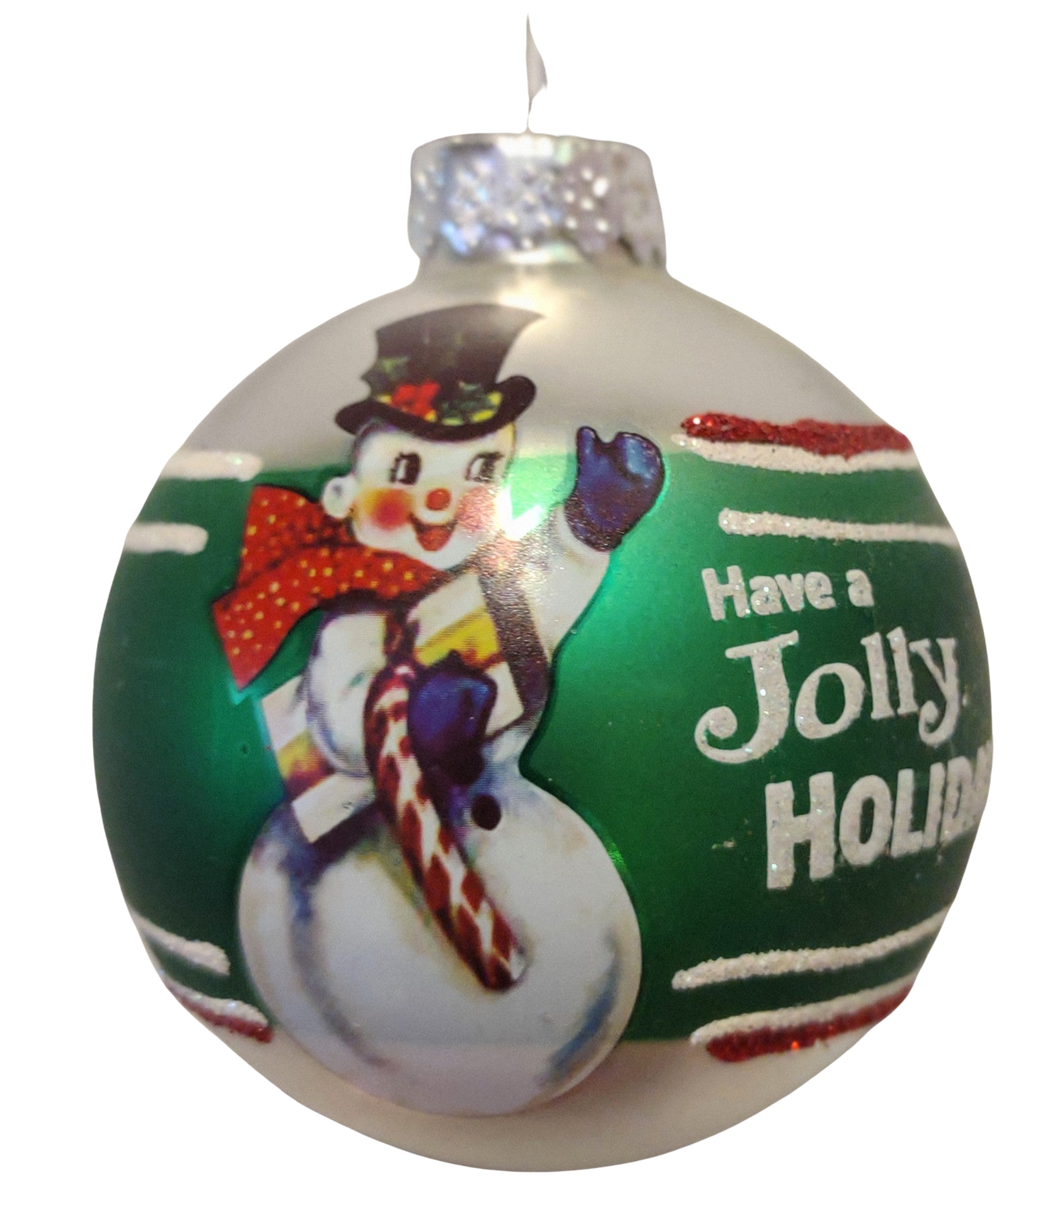 Glass Silver/Green/Red Ornament with Snowman - Have a Jolly Holiday  3